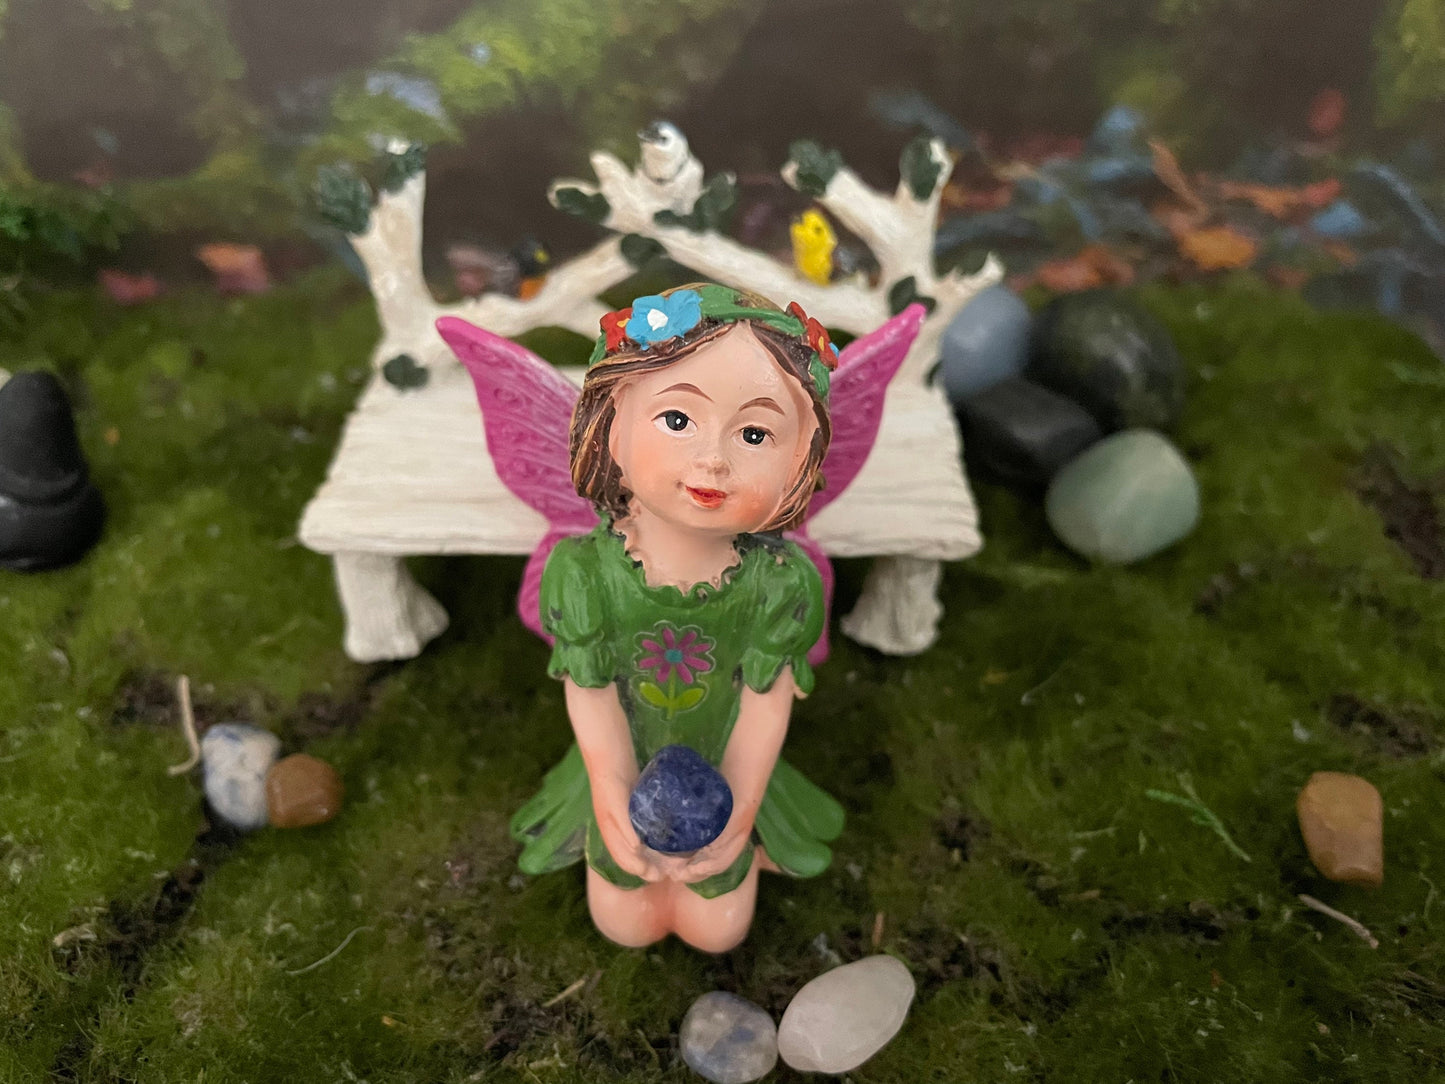 Look at her sweet face and she’s holding an Aventurine crystal hand-painted fairy with crystals